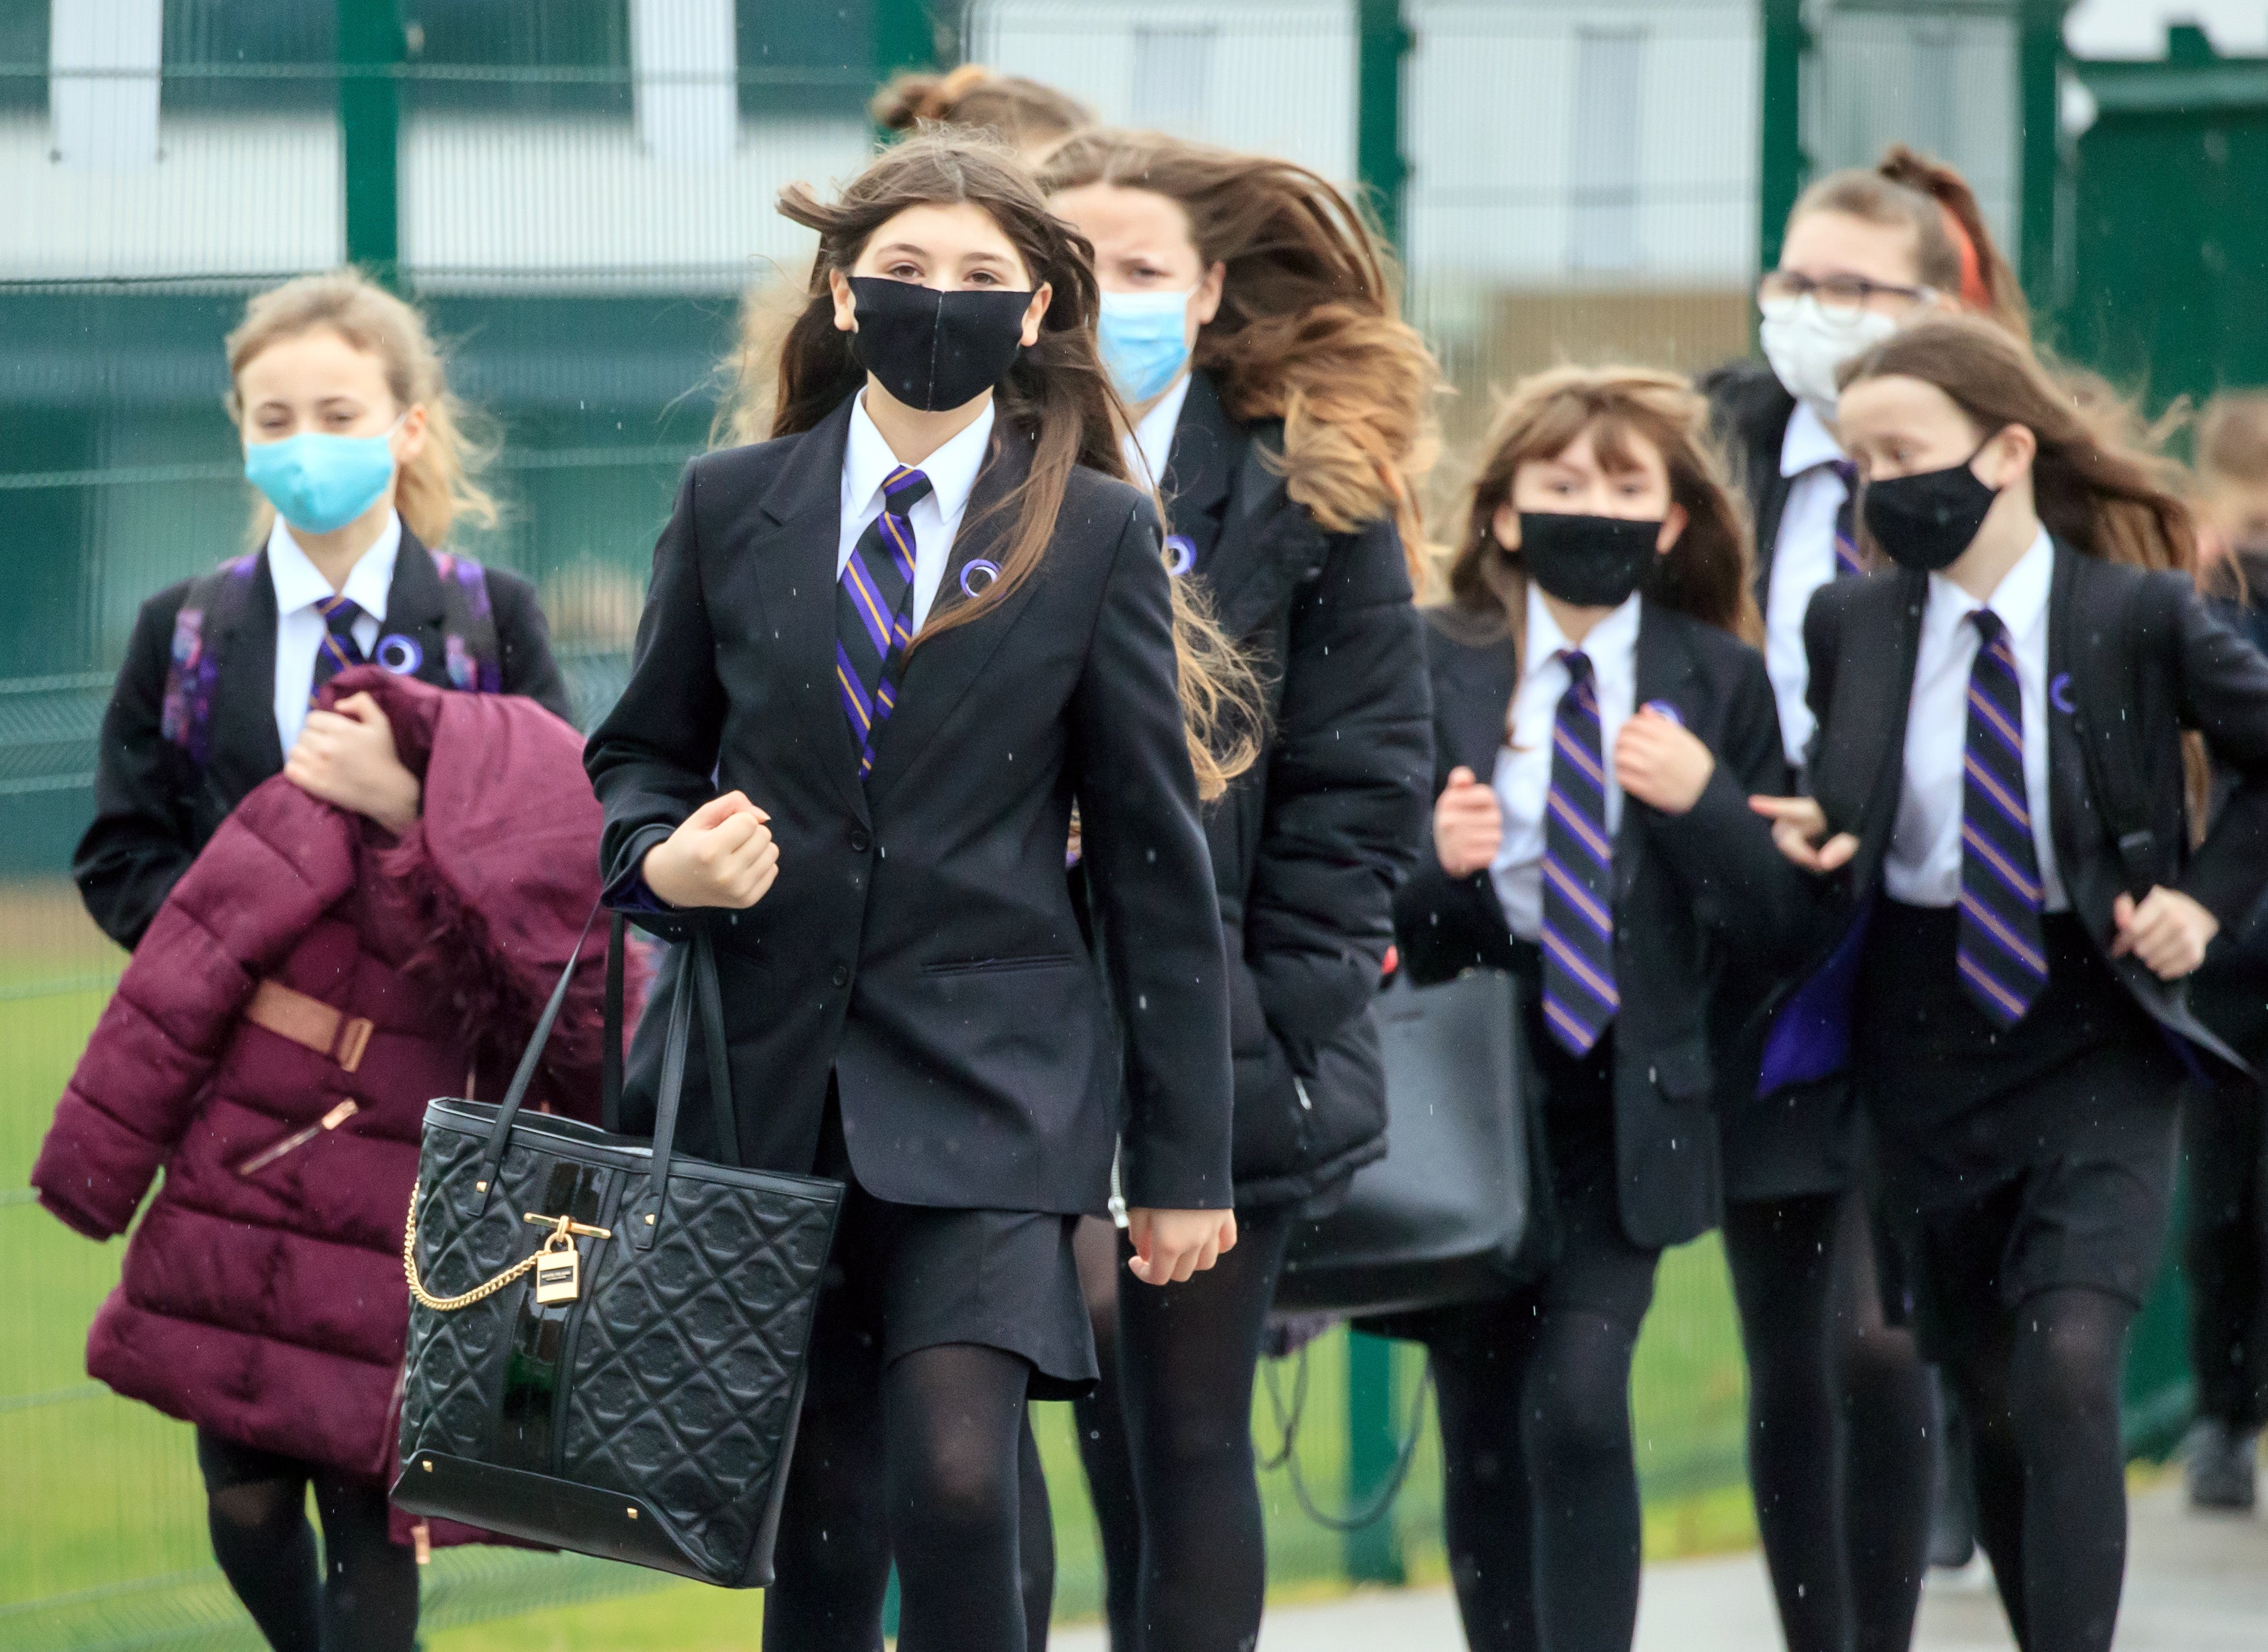 School leaders have told MPs that they have been made scapegoats for Government failures during the pandemic (Danny Lawson/PA)